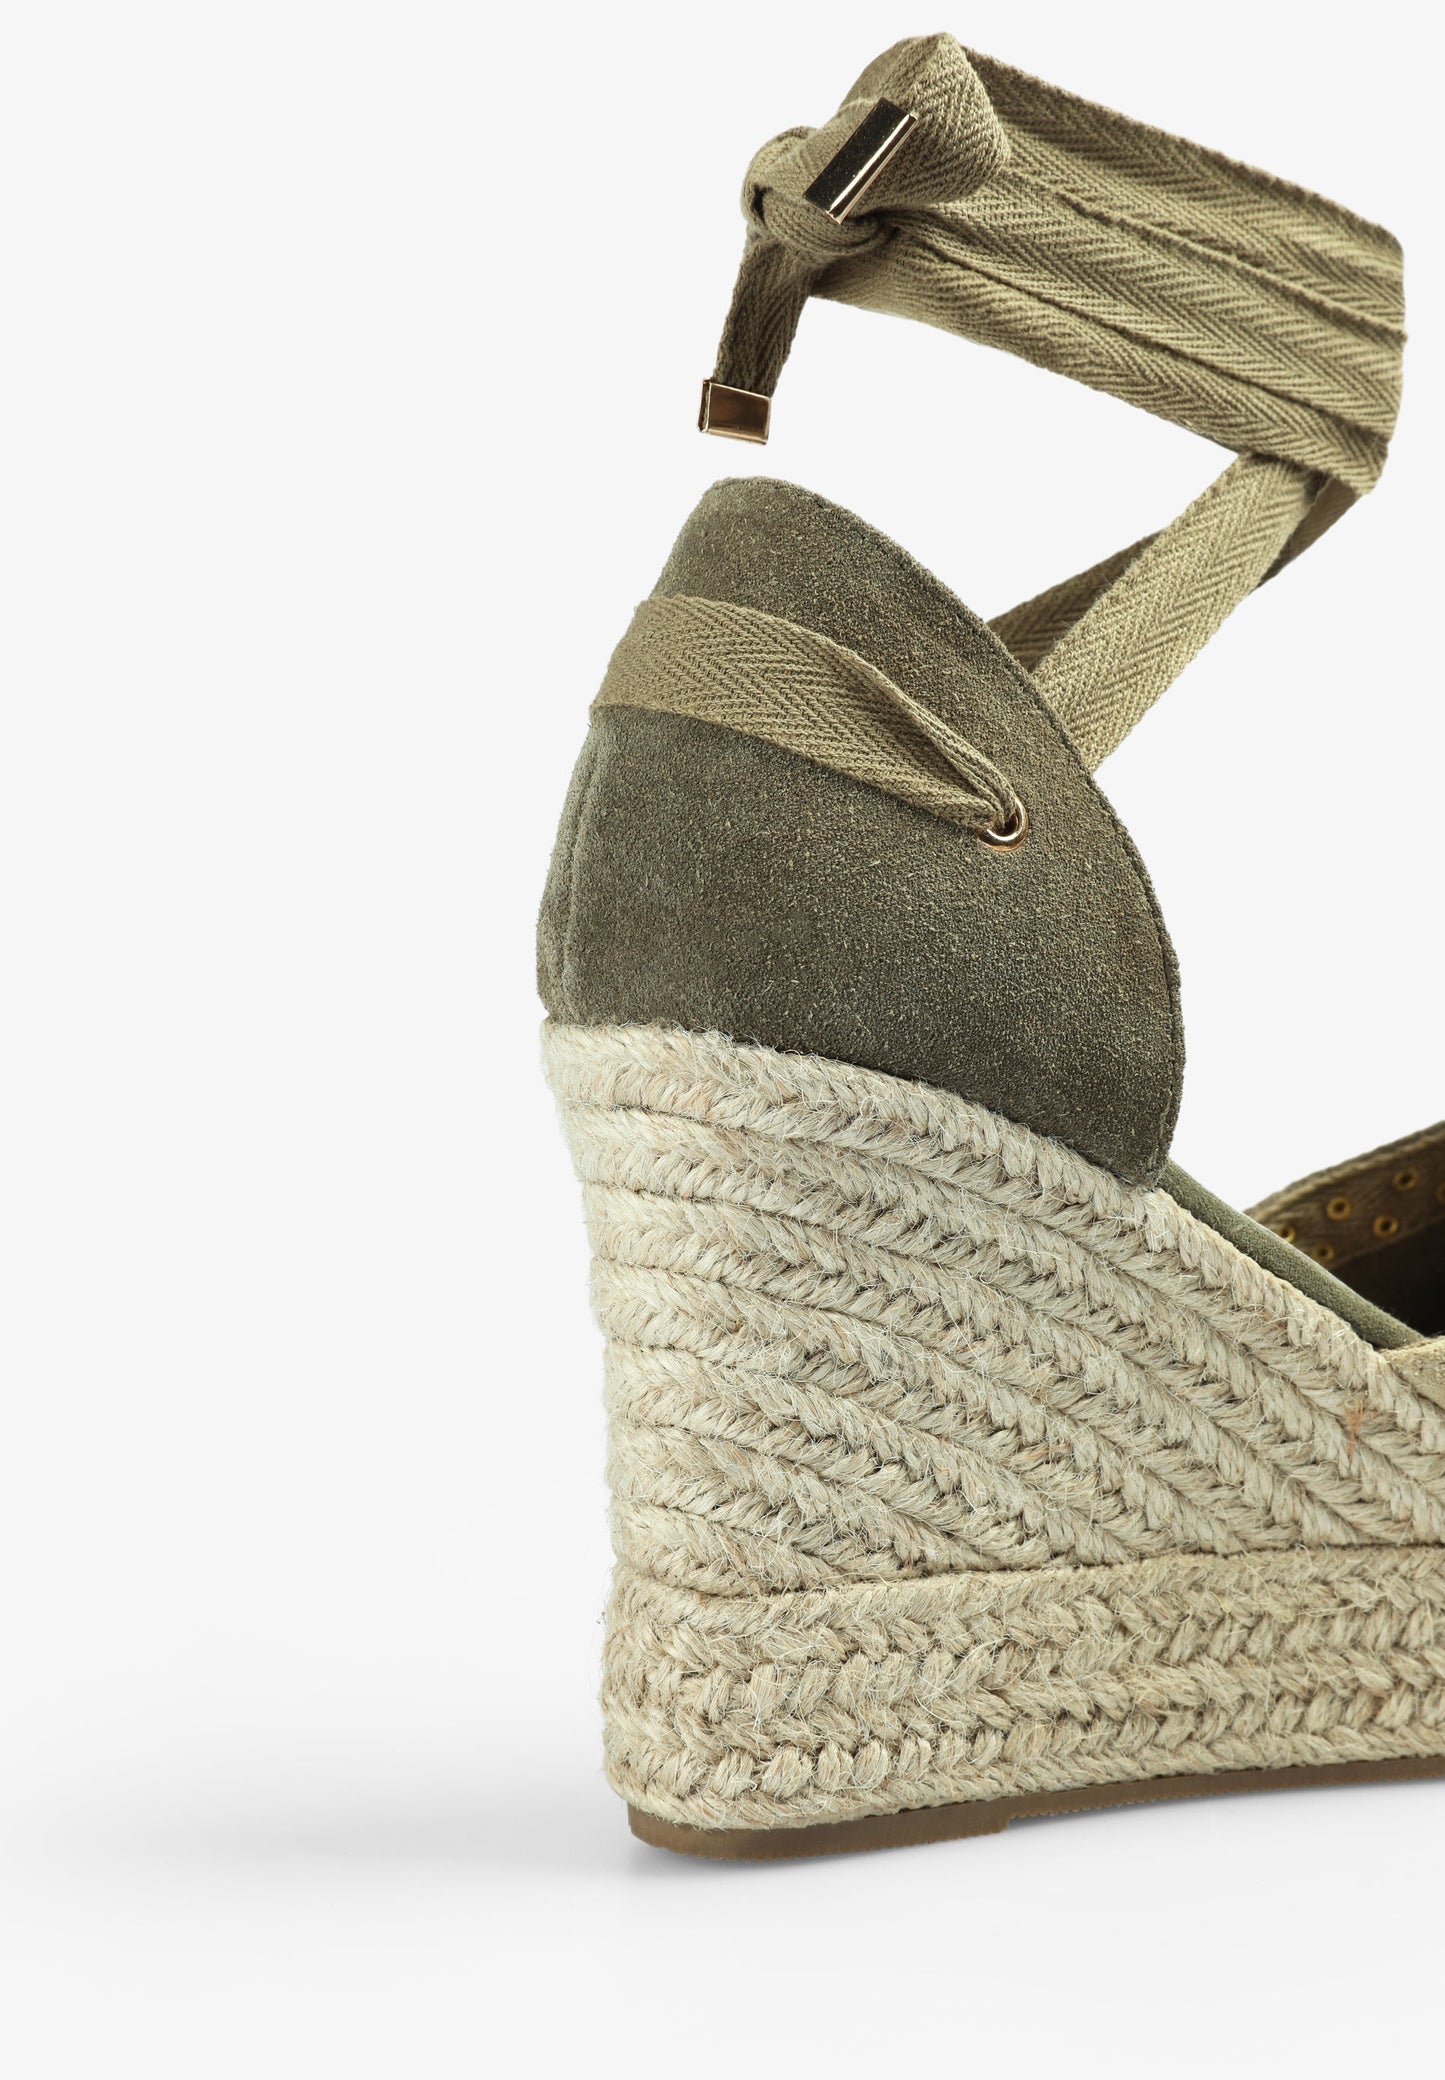 SUEDE WEDGE ESPADRILLES WITH STUDS